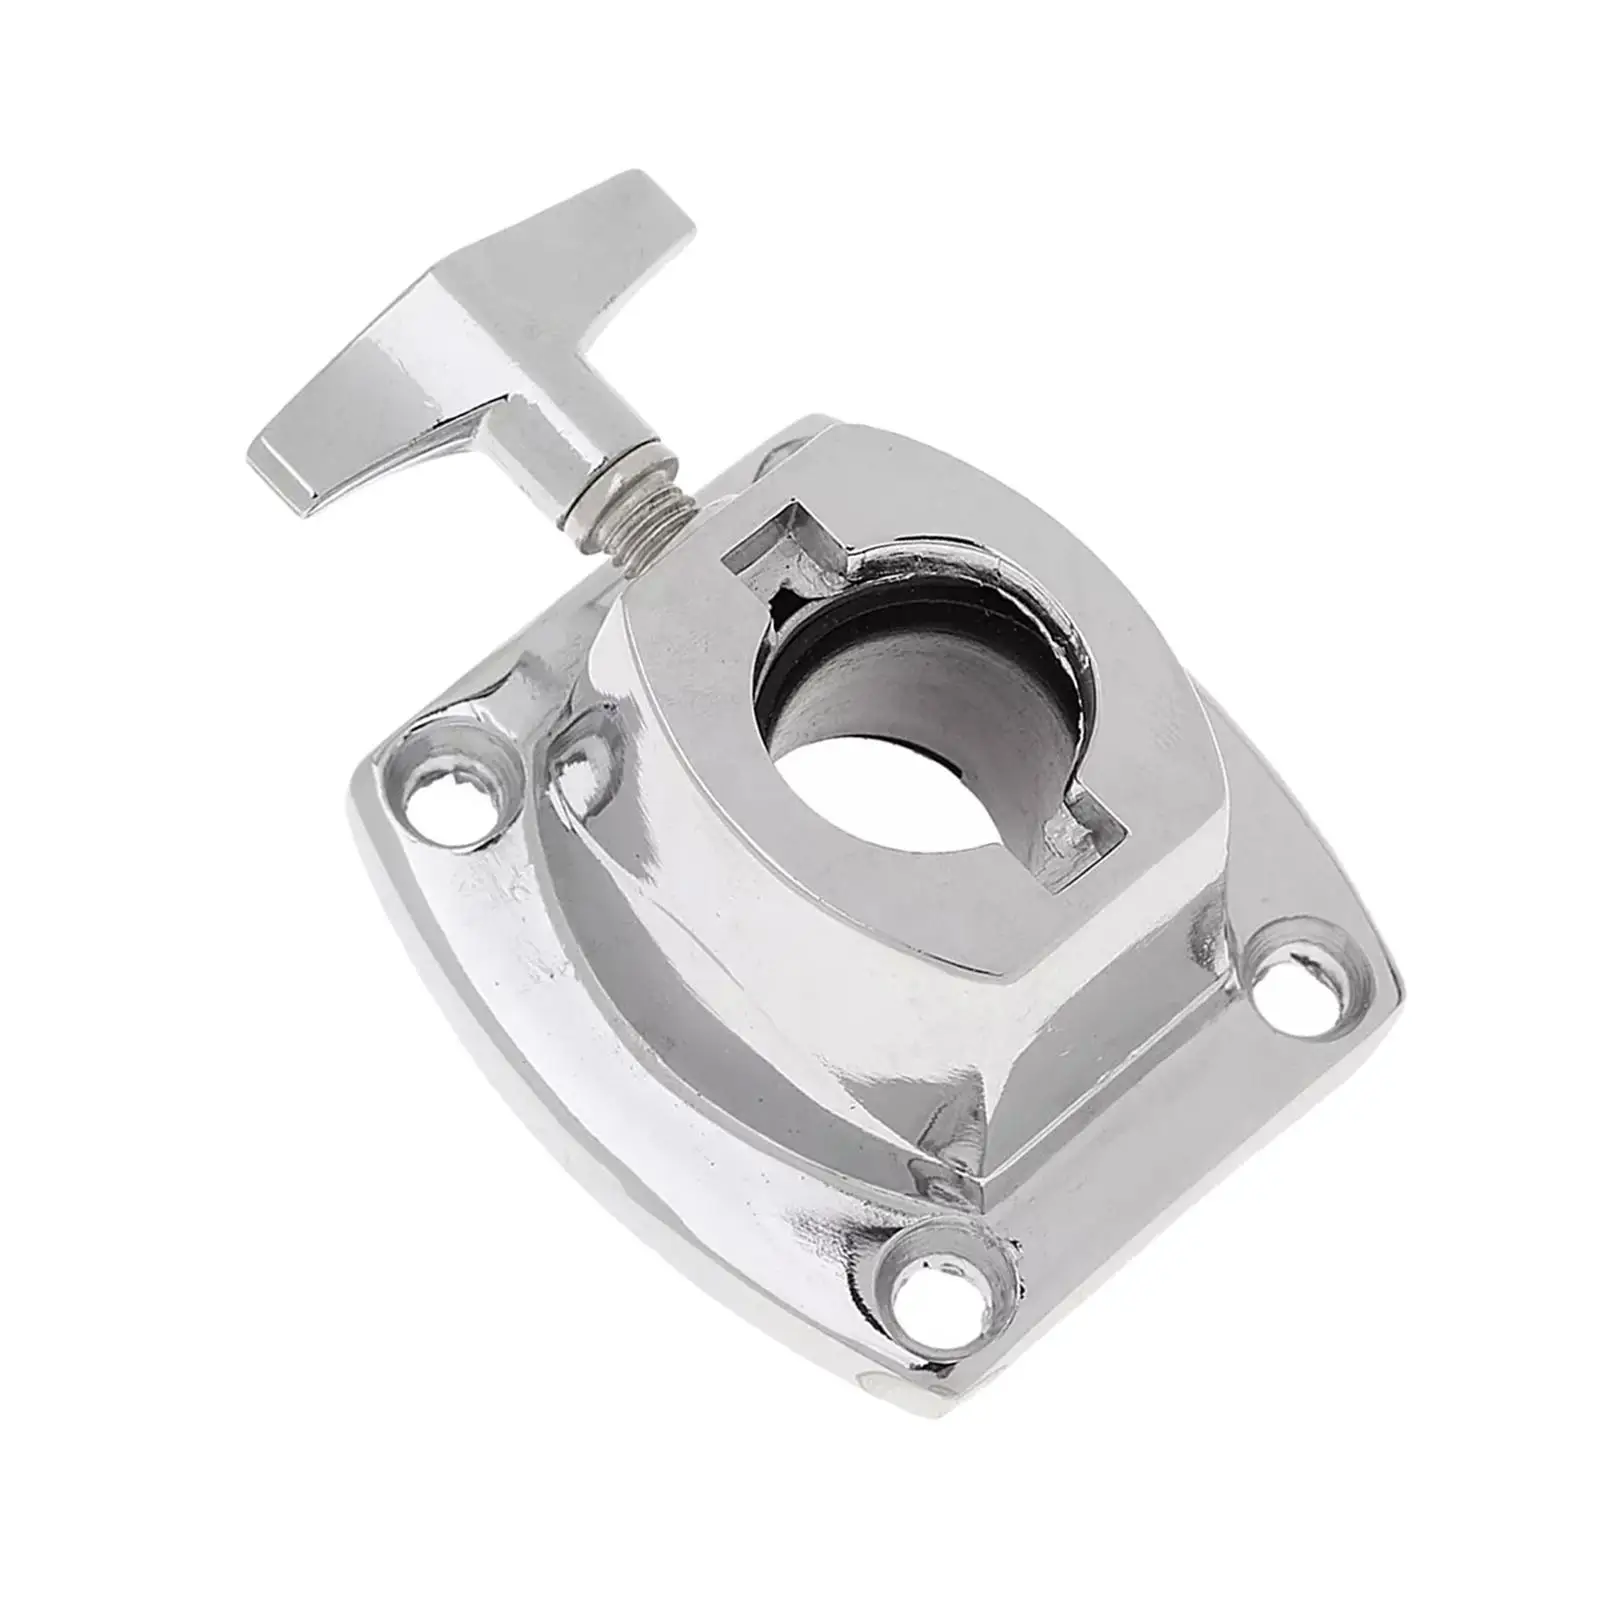 Tom Cymbal Holder Clamp Professional Cymbal Clamp for Drum Set Quality